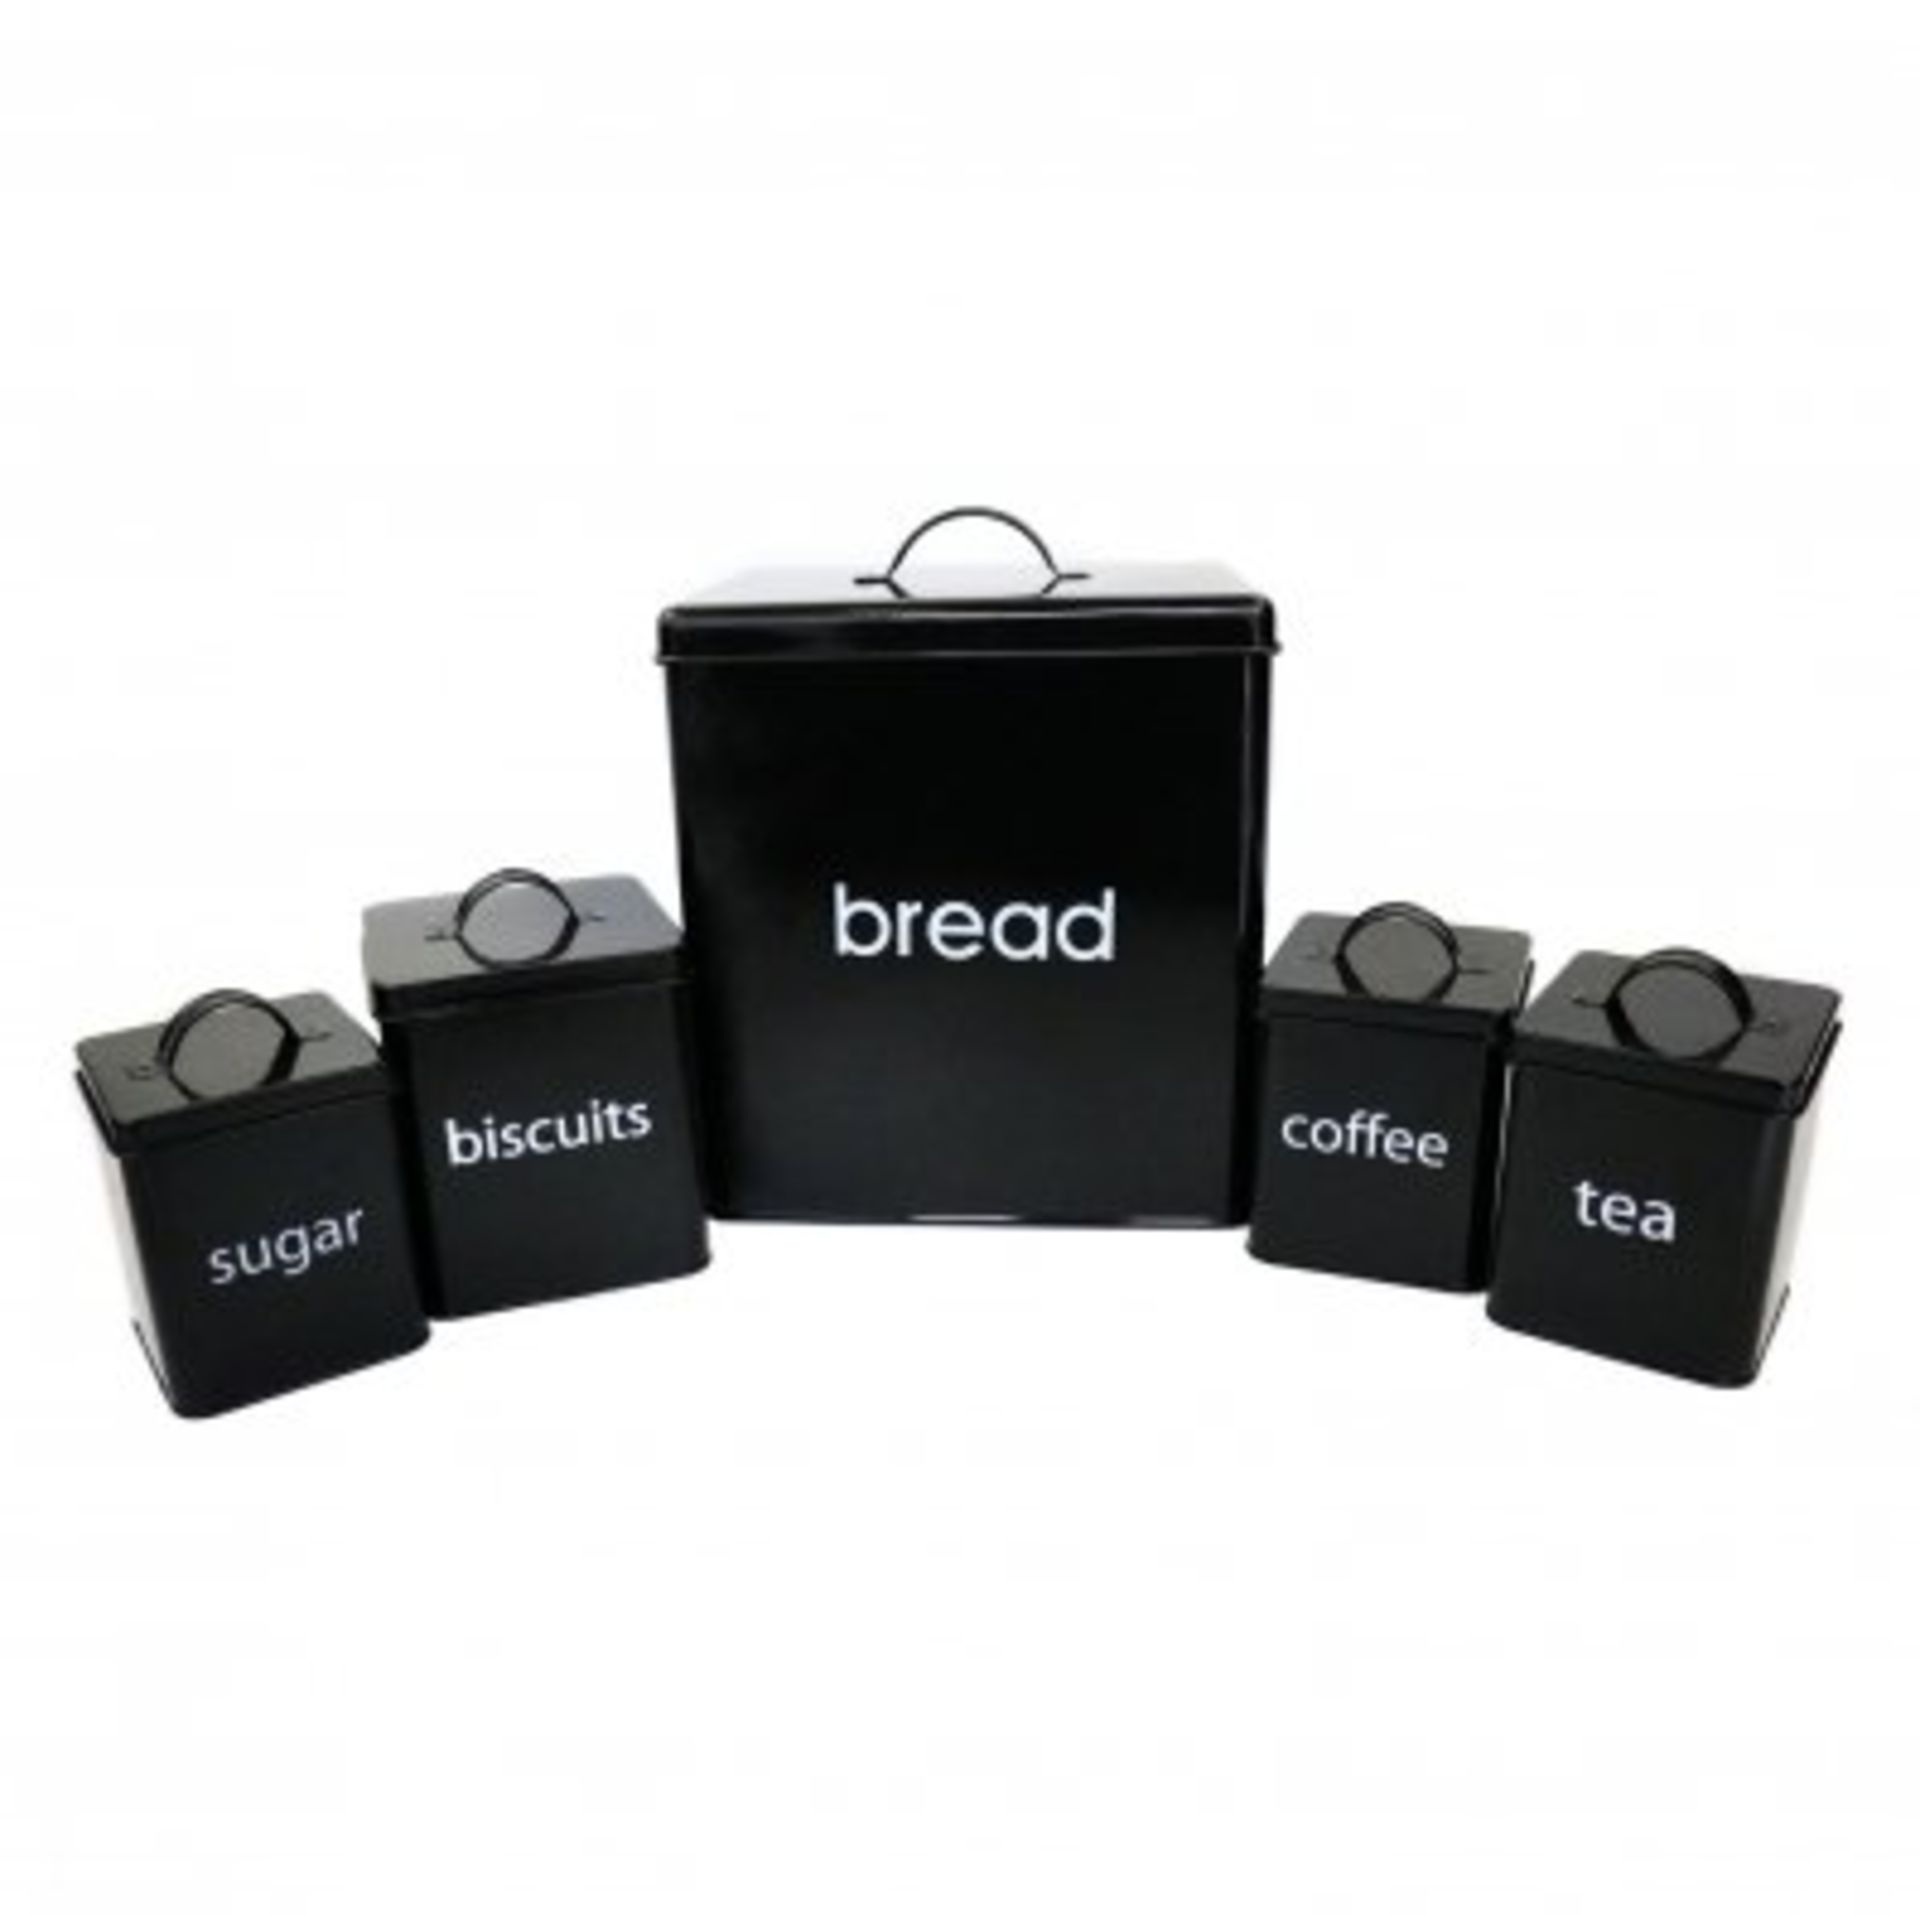 (KK66) 5 Piece Black Kitchen Canister Set Bread Biscuits Tea Sugar Coffee Add some style to ...